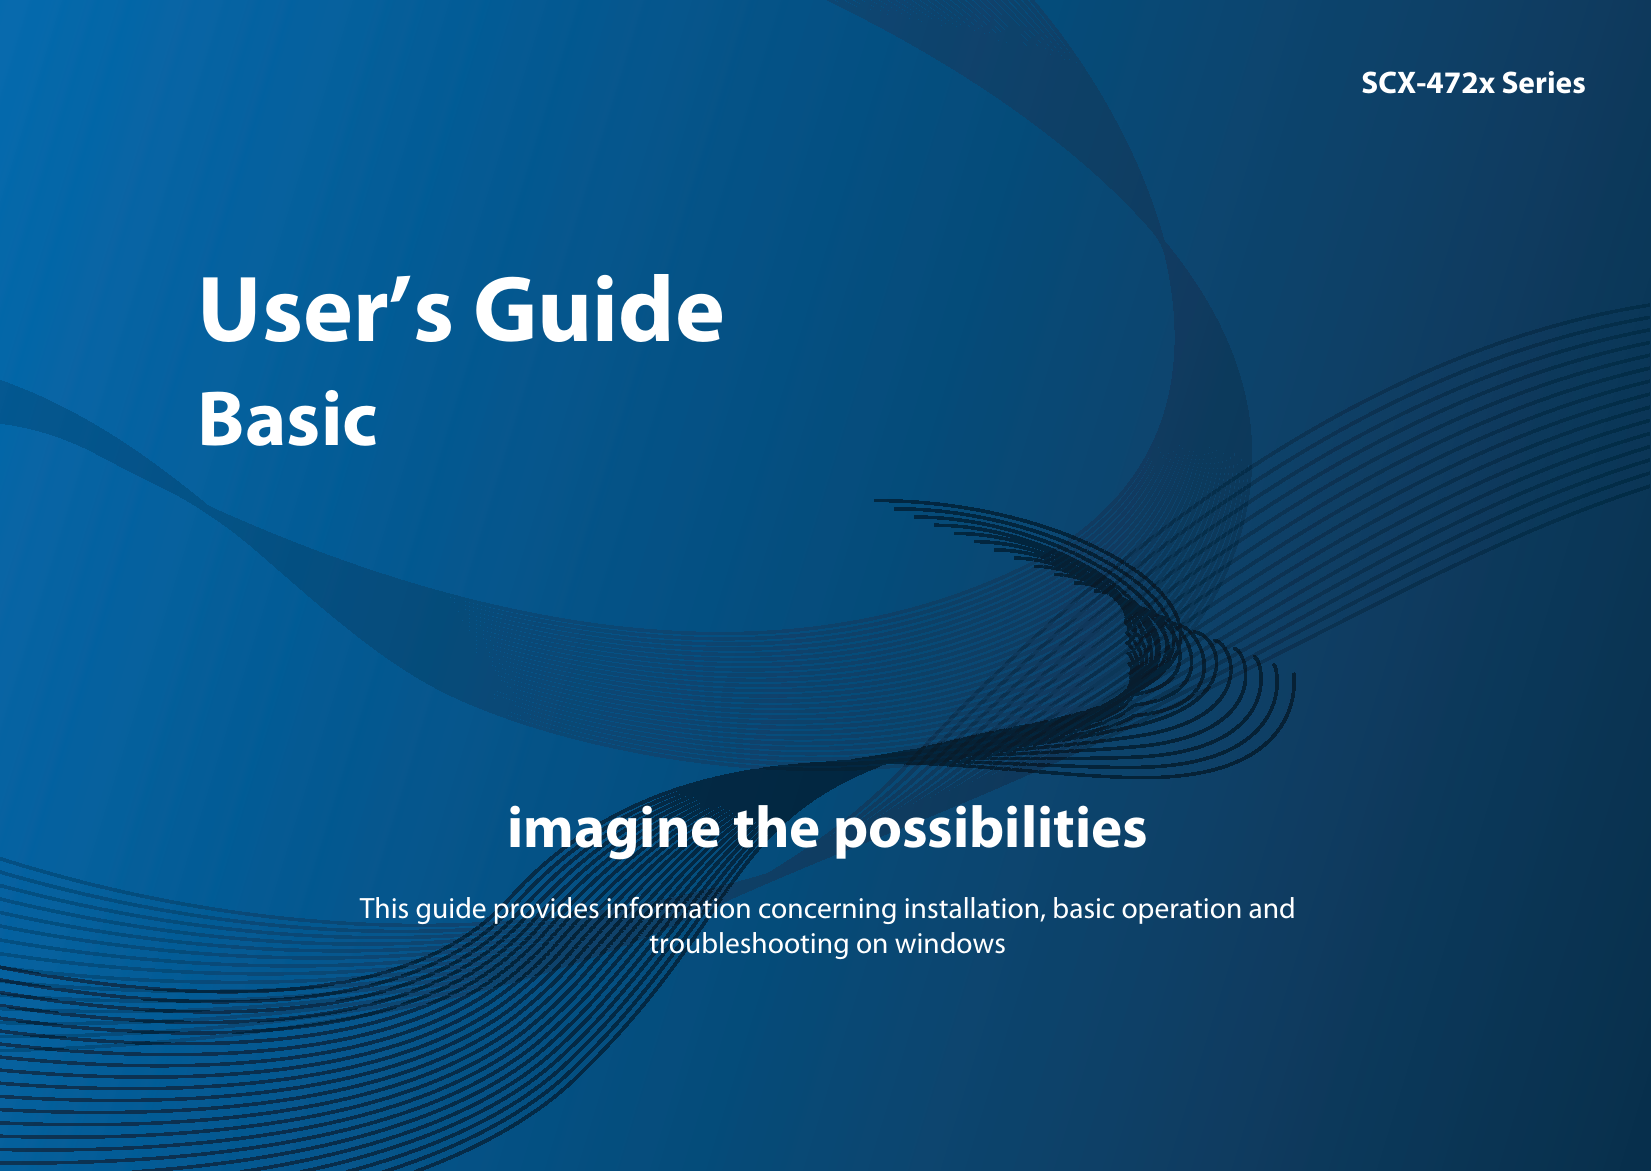 SCX-472x SeriesUser’s GuideBasicimagine the possibilitiesThis guide provides information concerning installation, basic operation and troubleshooting on windows